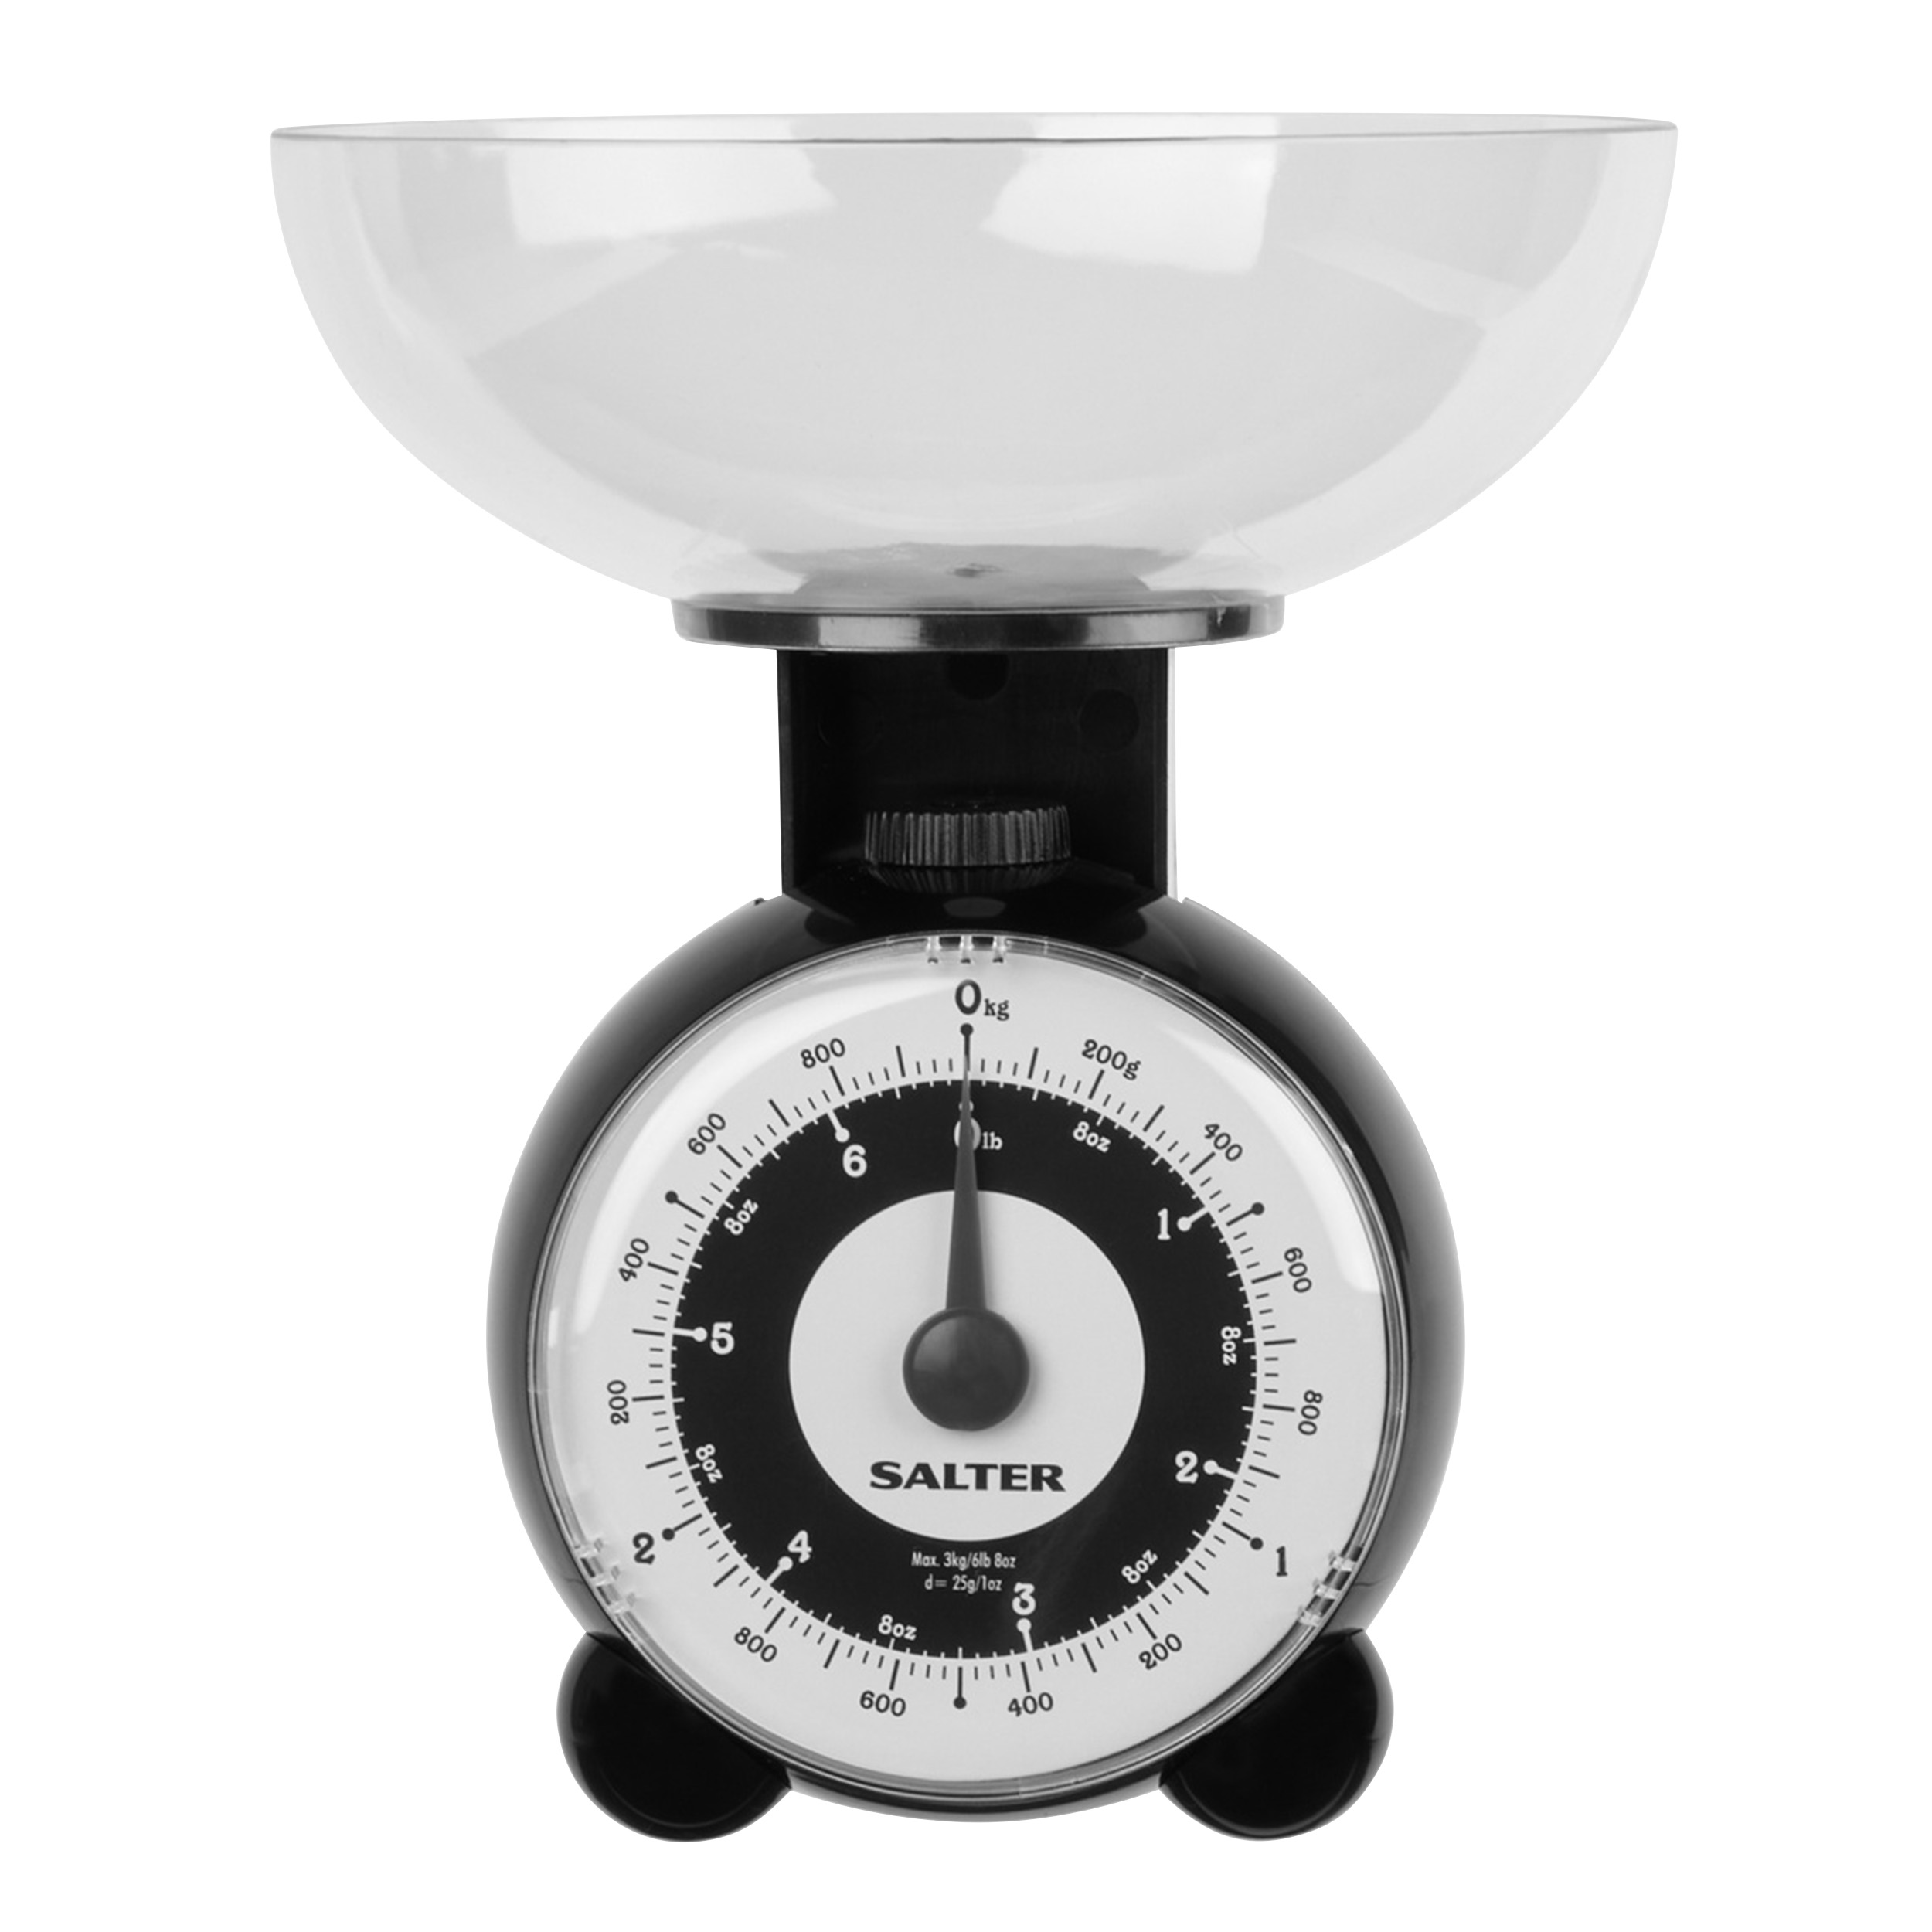 Taylor 4.4 lb Digital Kitchen Scale and Bowl; Instant Read Meat Thermometer  and Timer